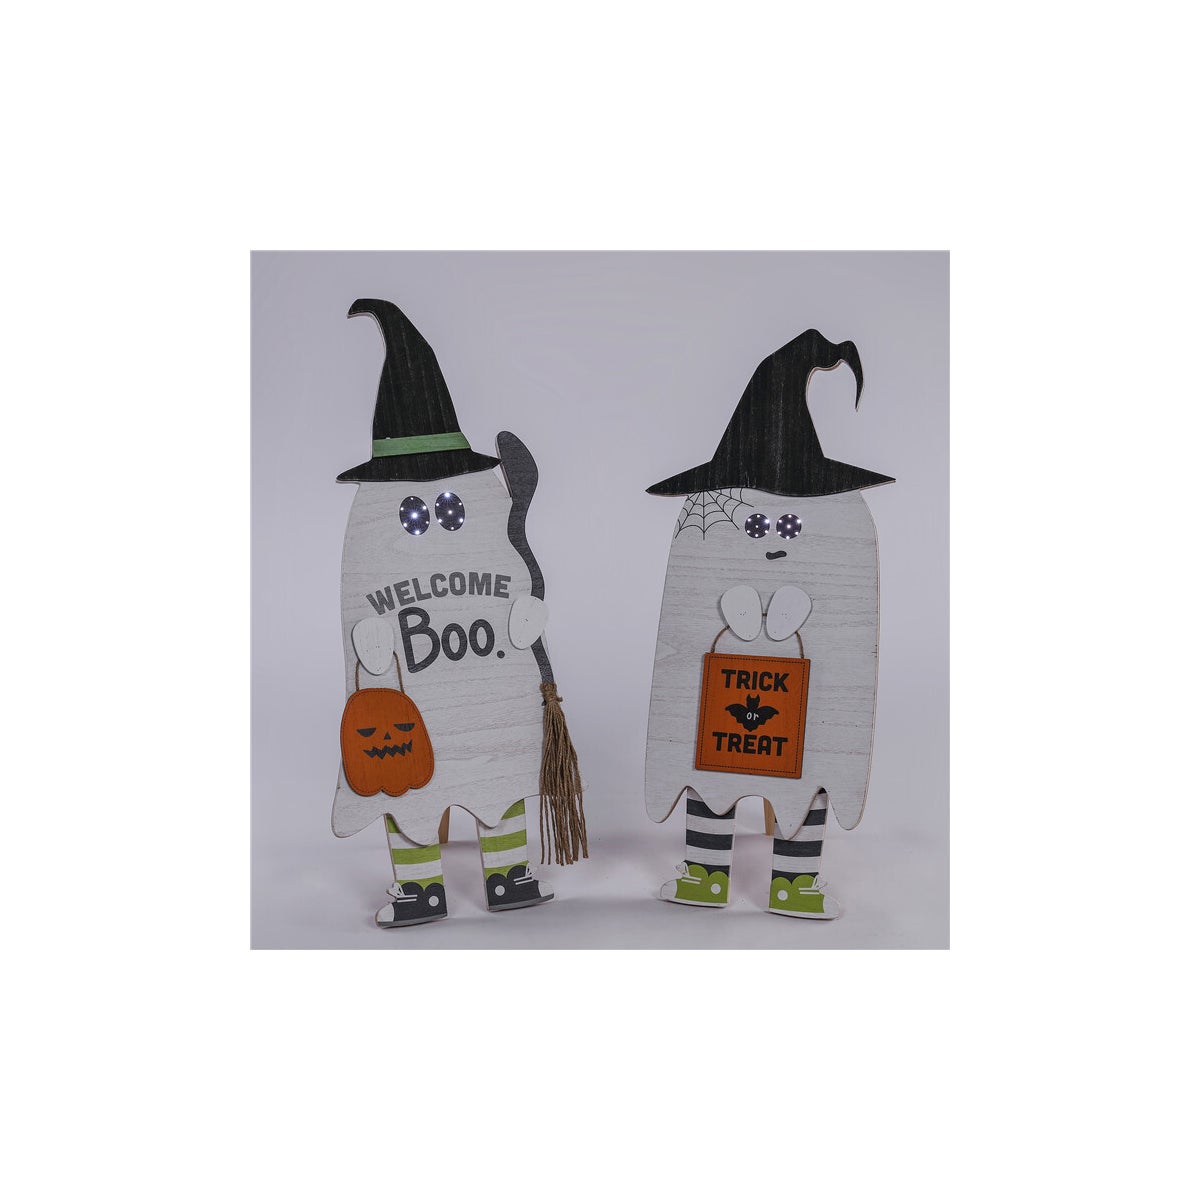 Wd Boo Crew 3D Ghost Glow Wall/Easel 2 Asst